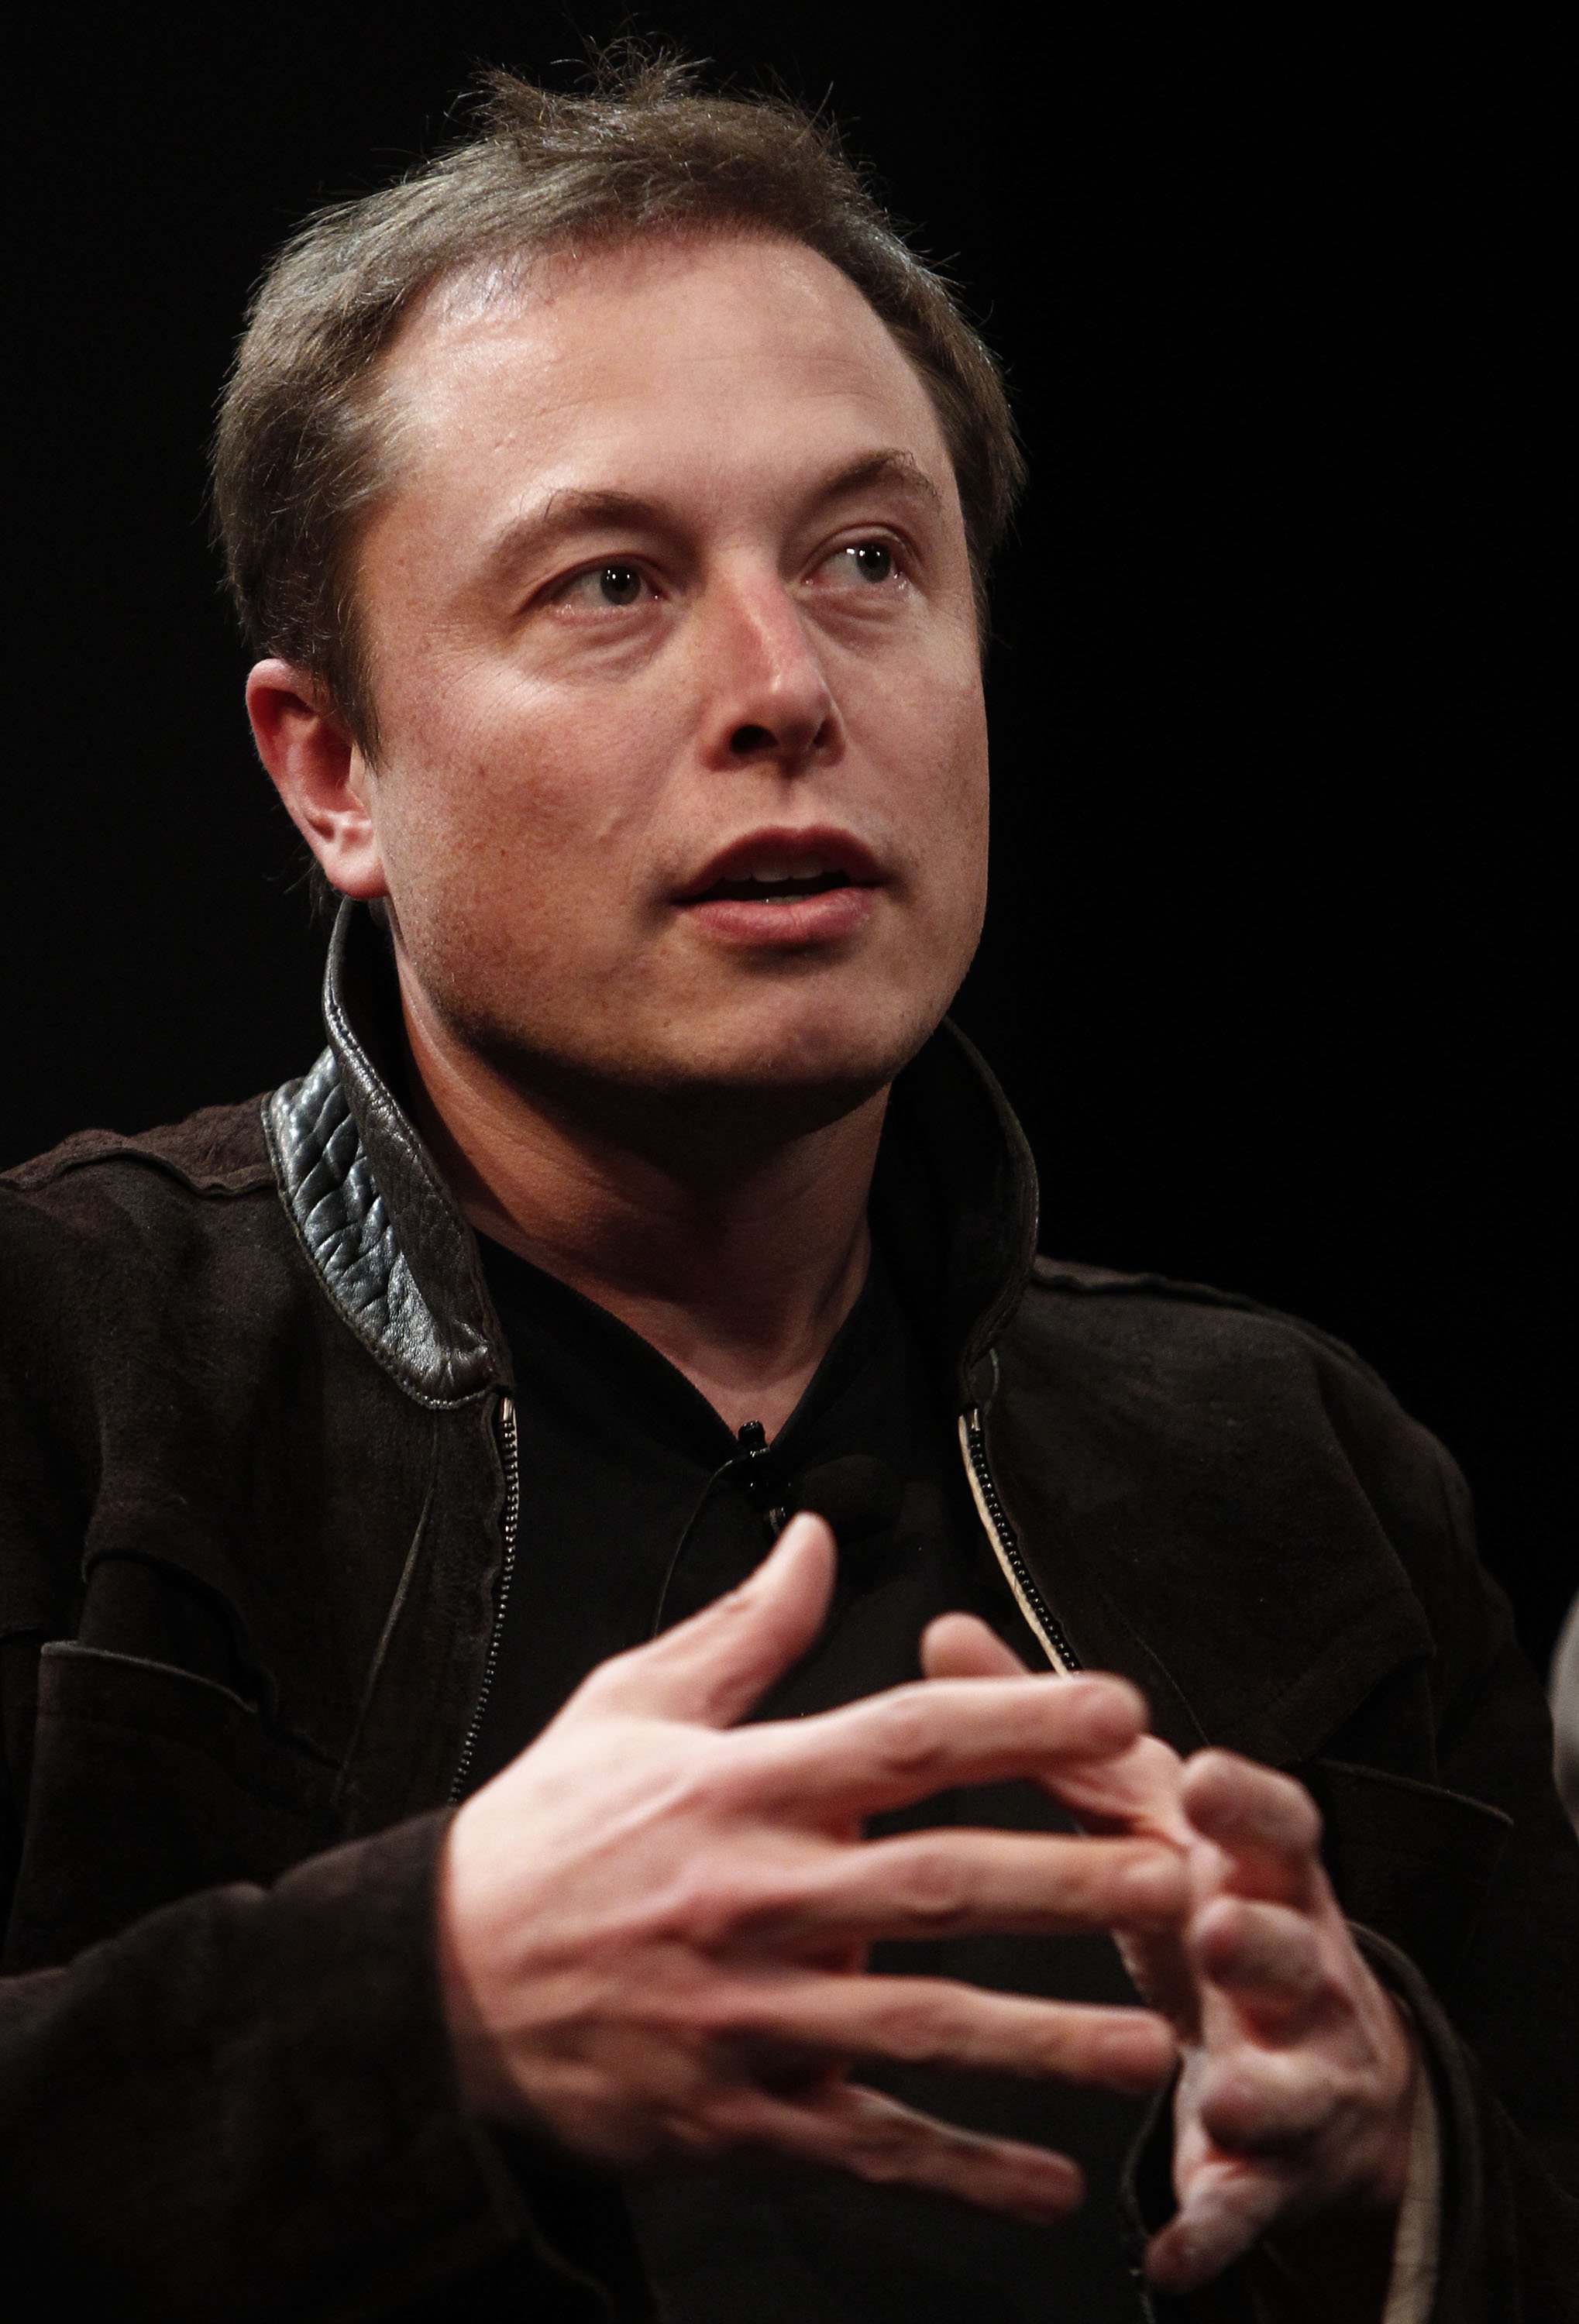 Tesla Motors founder Elon Musk attends Tribeca talks after the movie "Revenge of the Electric Cars" during the 10th annual Tribeca Film Festival at SVA Theater on April 23, 2011 in New York City. | Source: Getty Images